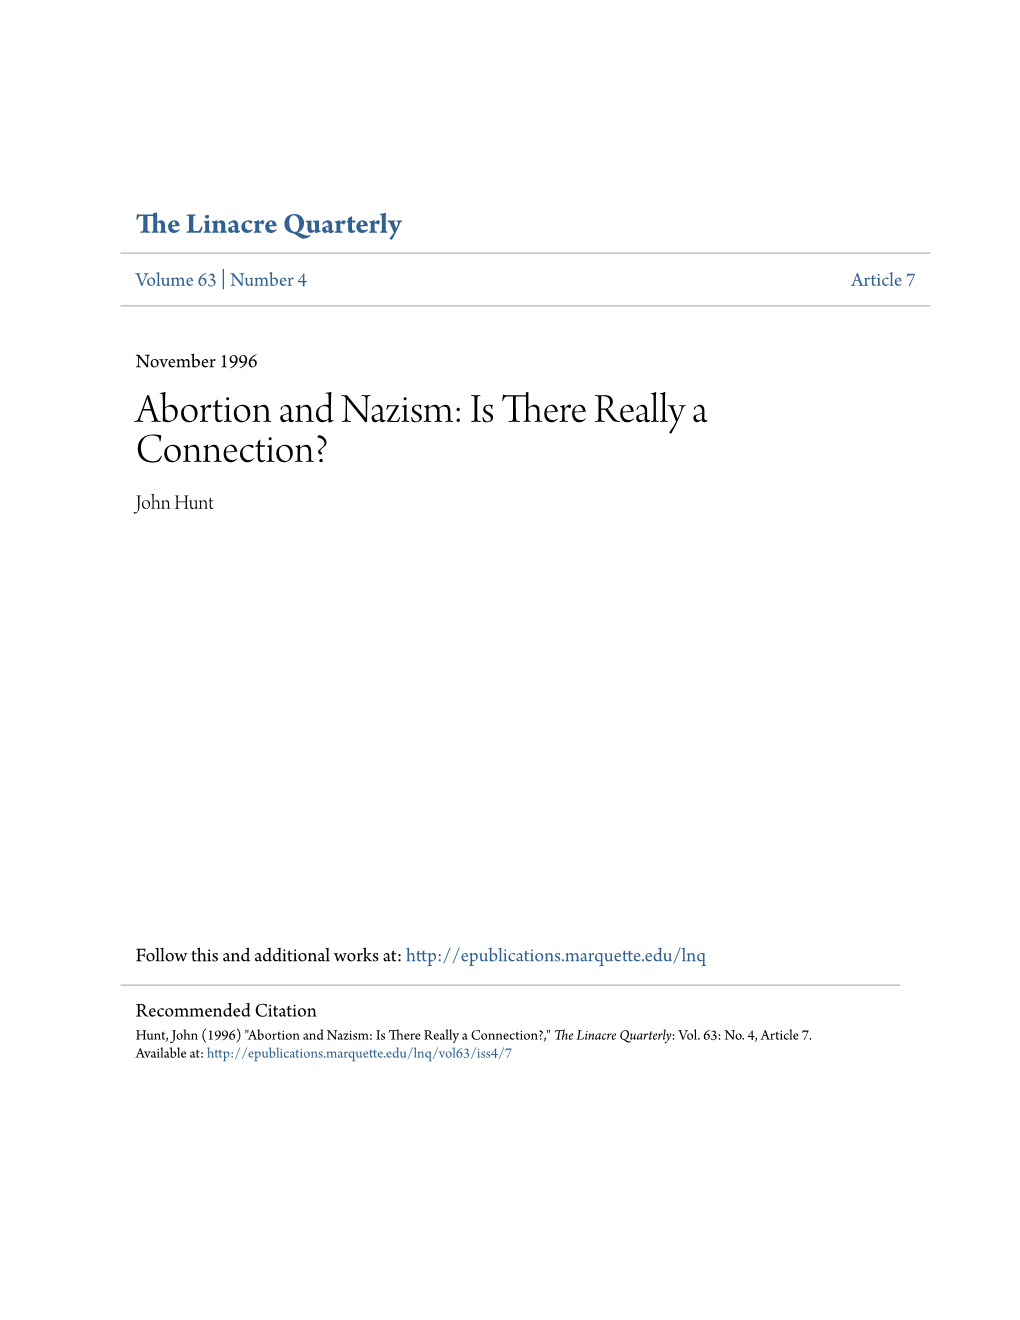 Abortion and Nazism: Is There Really a Connection? John Hunt